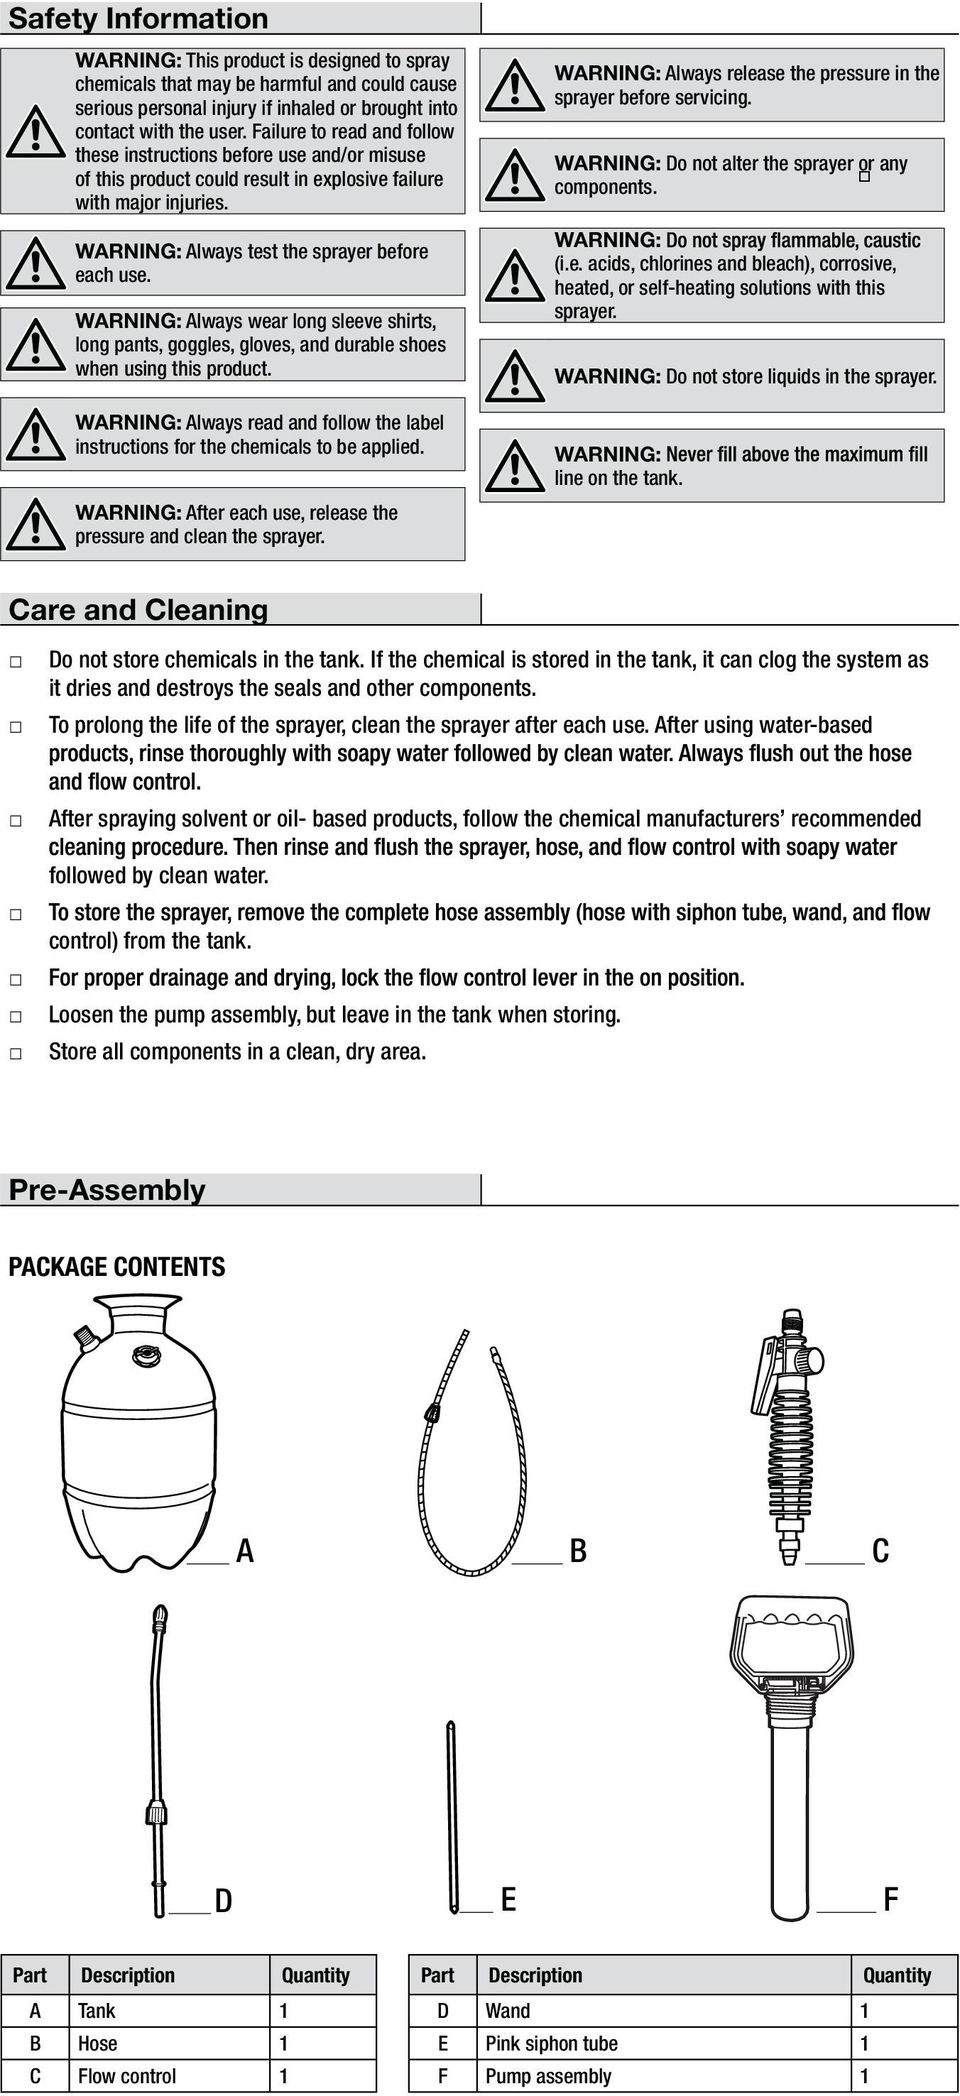 WRNING: lways wear long sleeve shirts, long pants, goggles, gloves, and durable shoes when using this product. WRNING: lways read and follow the label instructions for the chemicals to be applied.